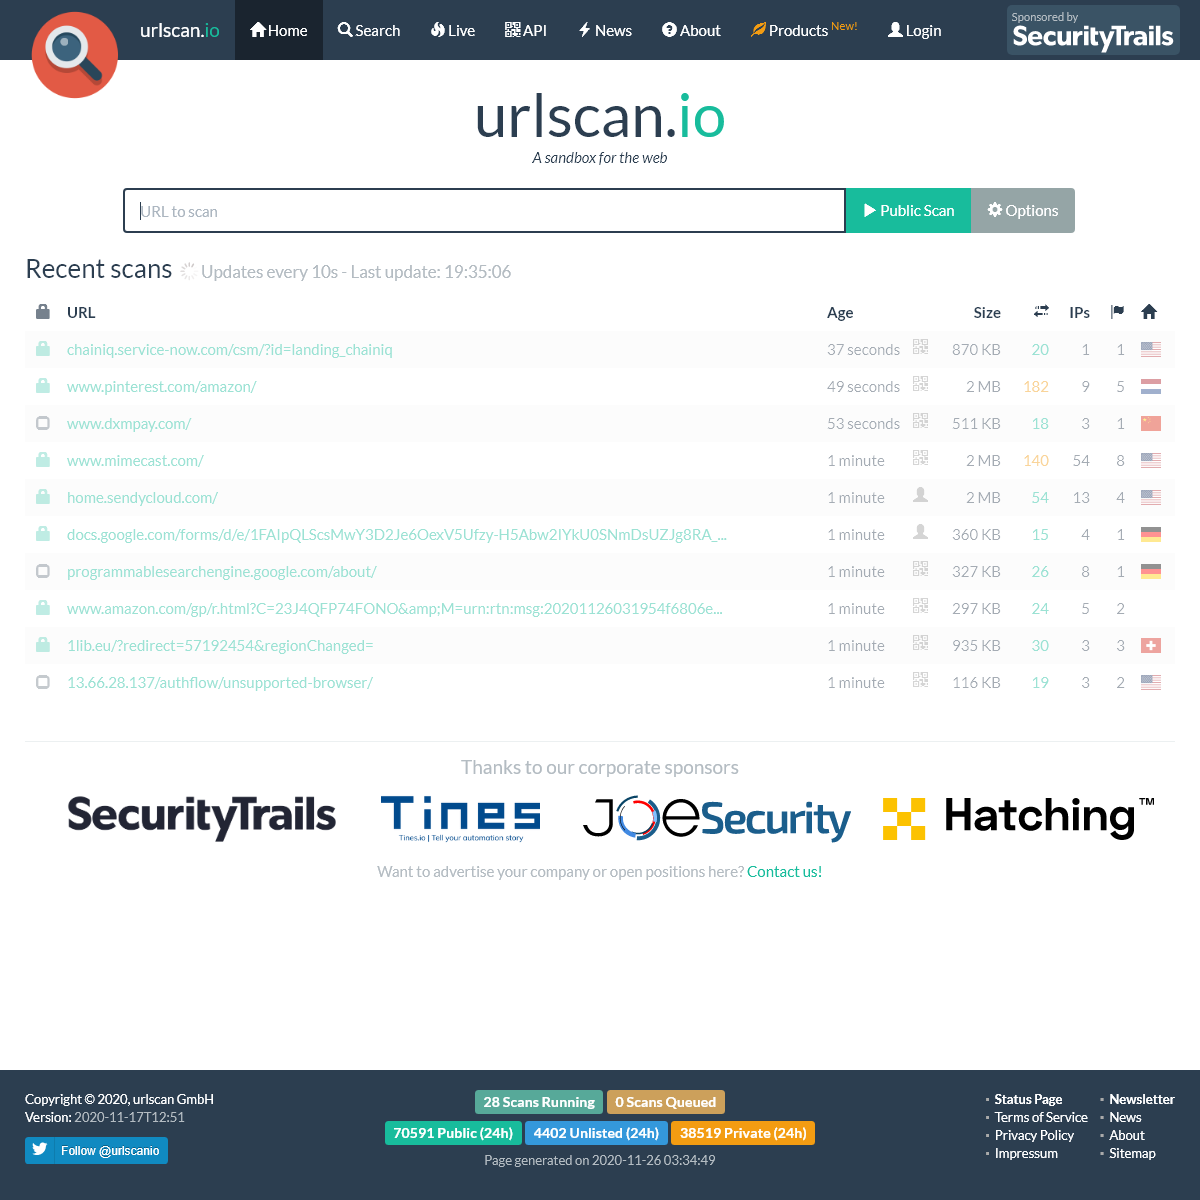 A complete backup of urlscan.io